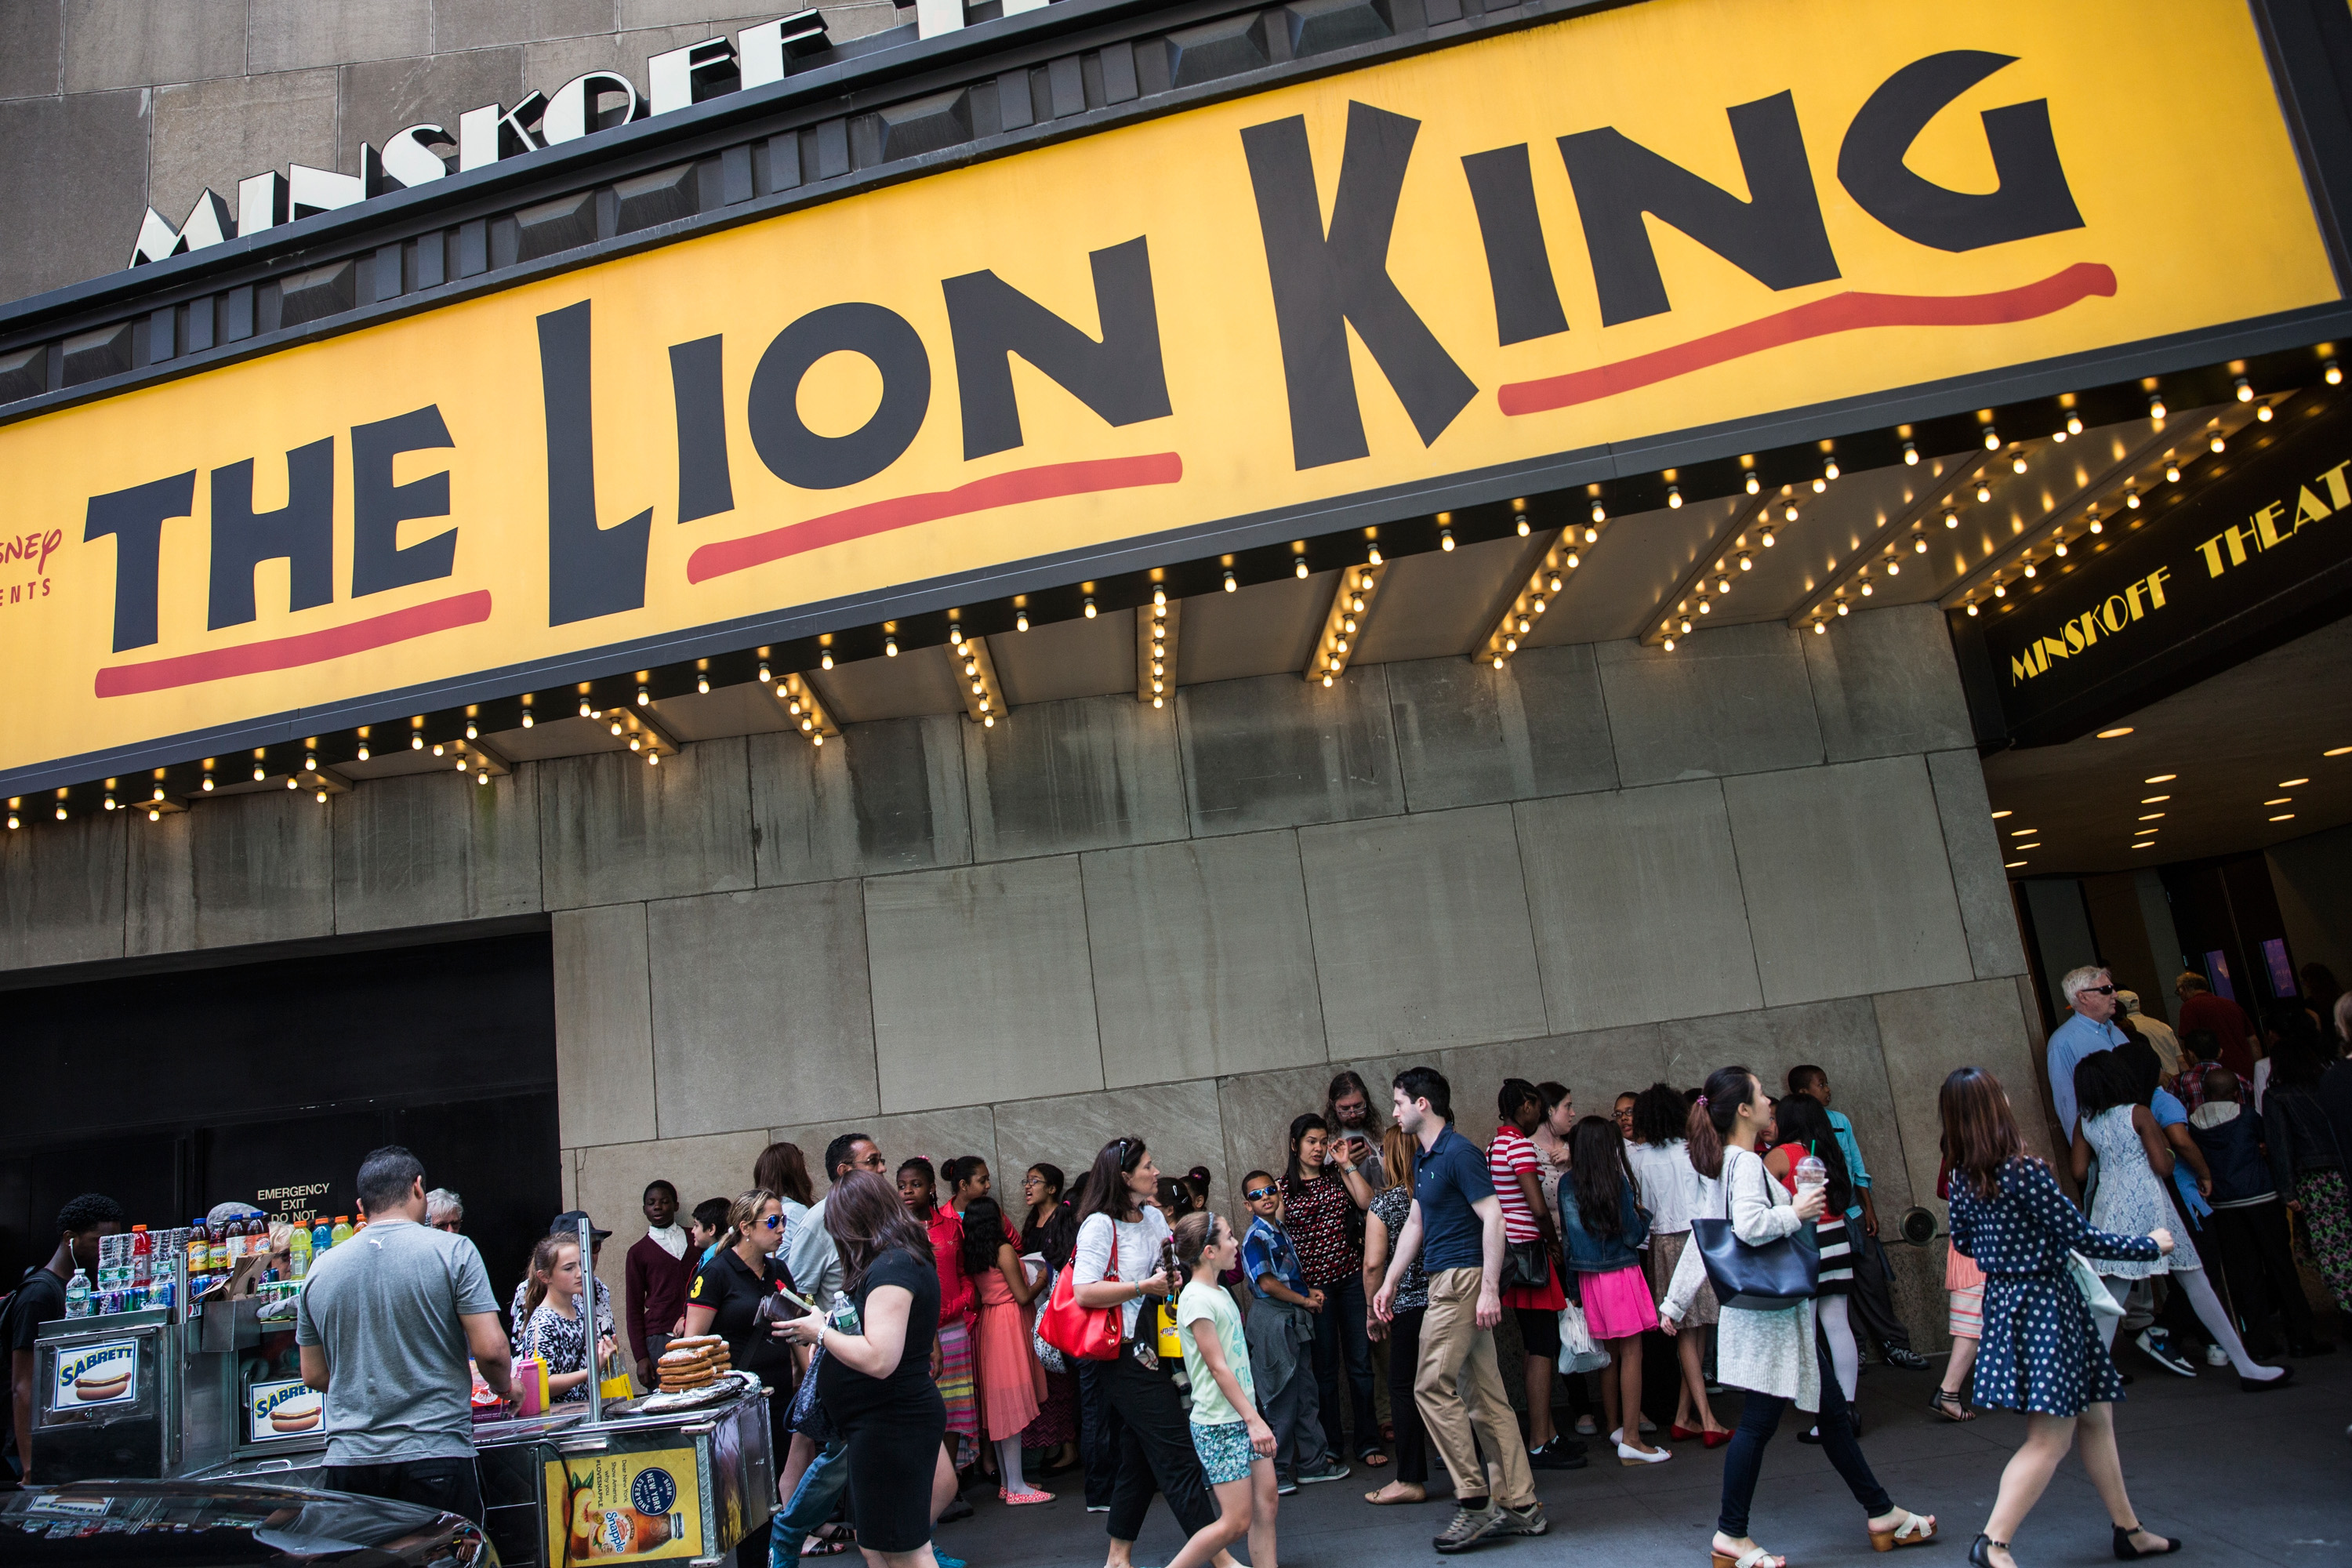 People wait in line to see the matinee show of The Lion King on May 27, 2015 in New York City. (Andrew Burton—Getty Images)